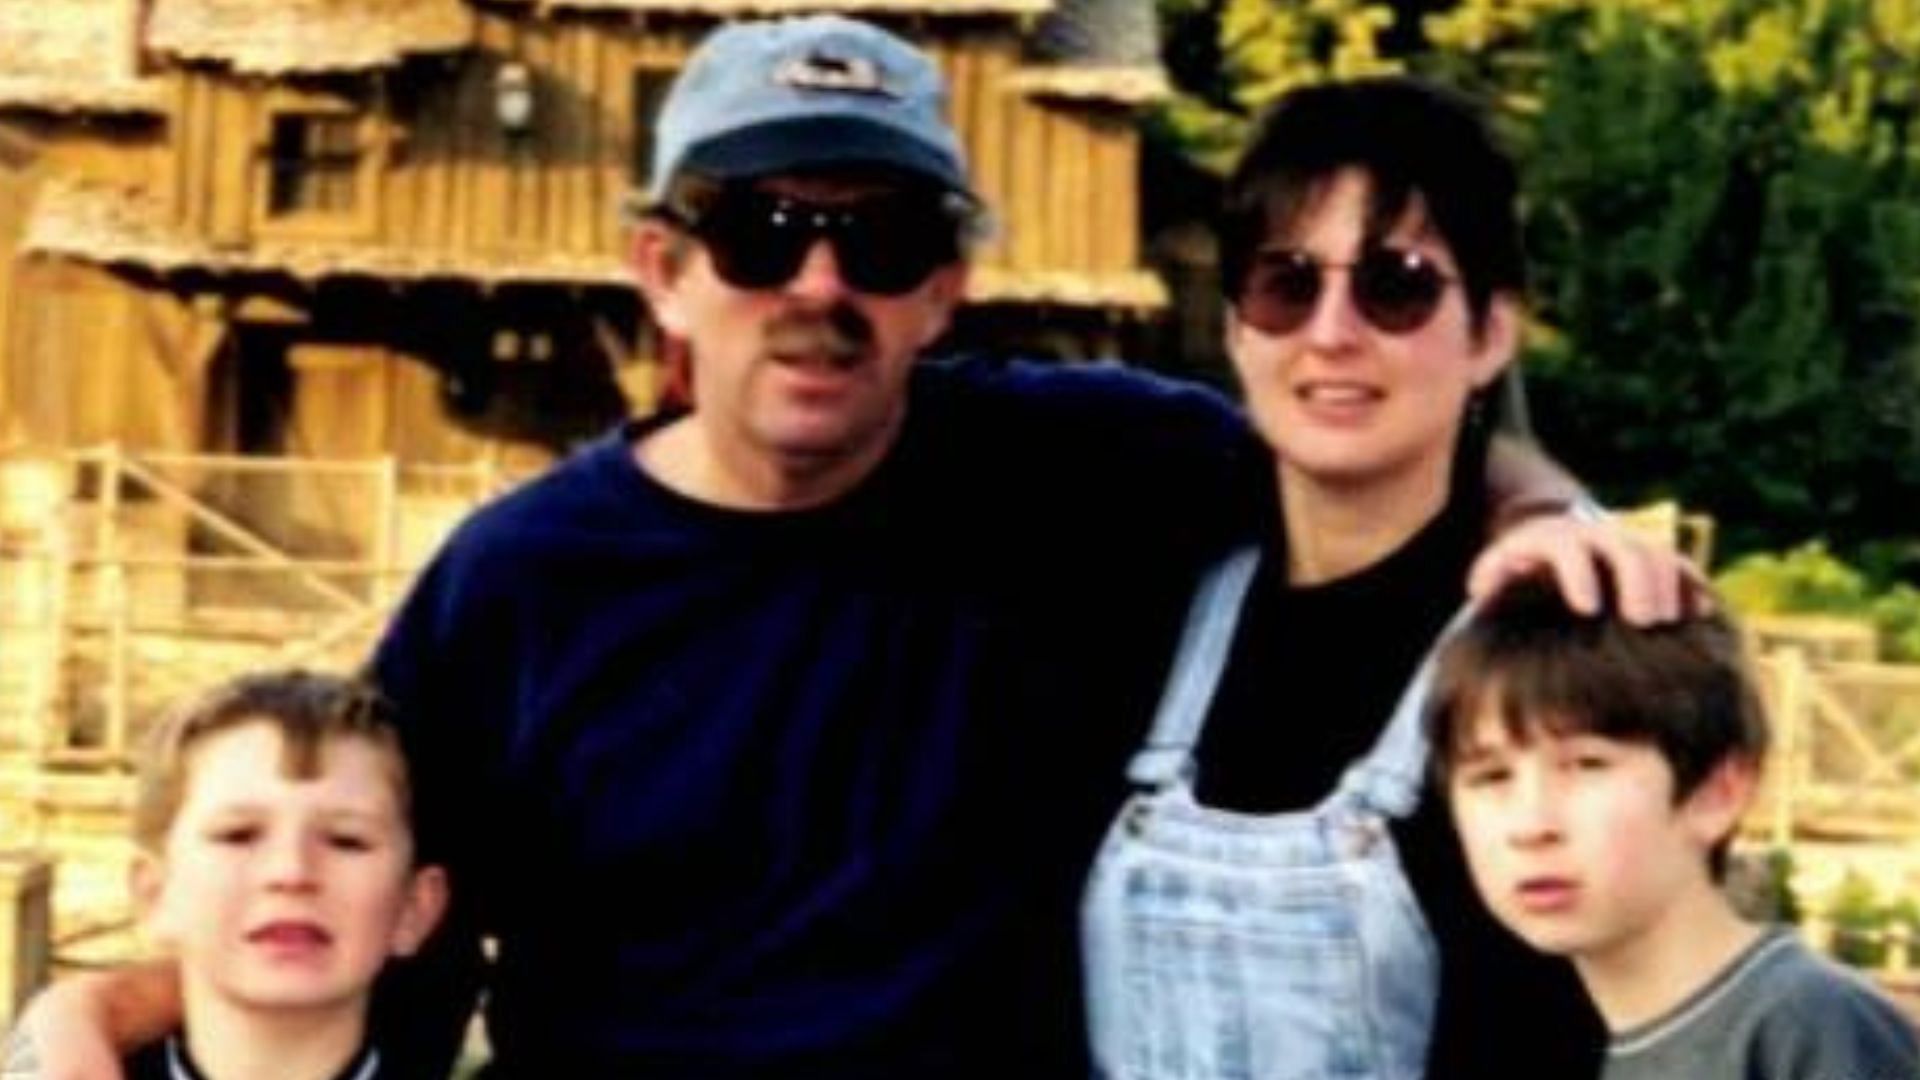 Bill Stout with his wife Anne Marie Stout and his two young sons (Image via NBC News)